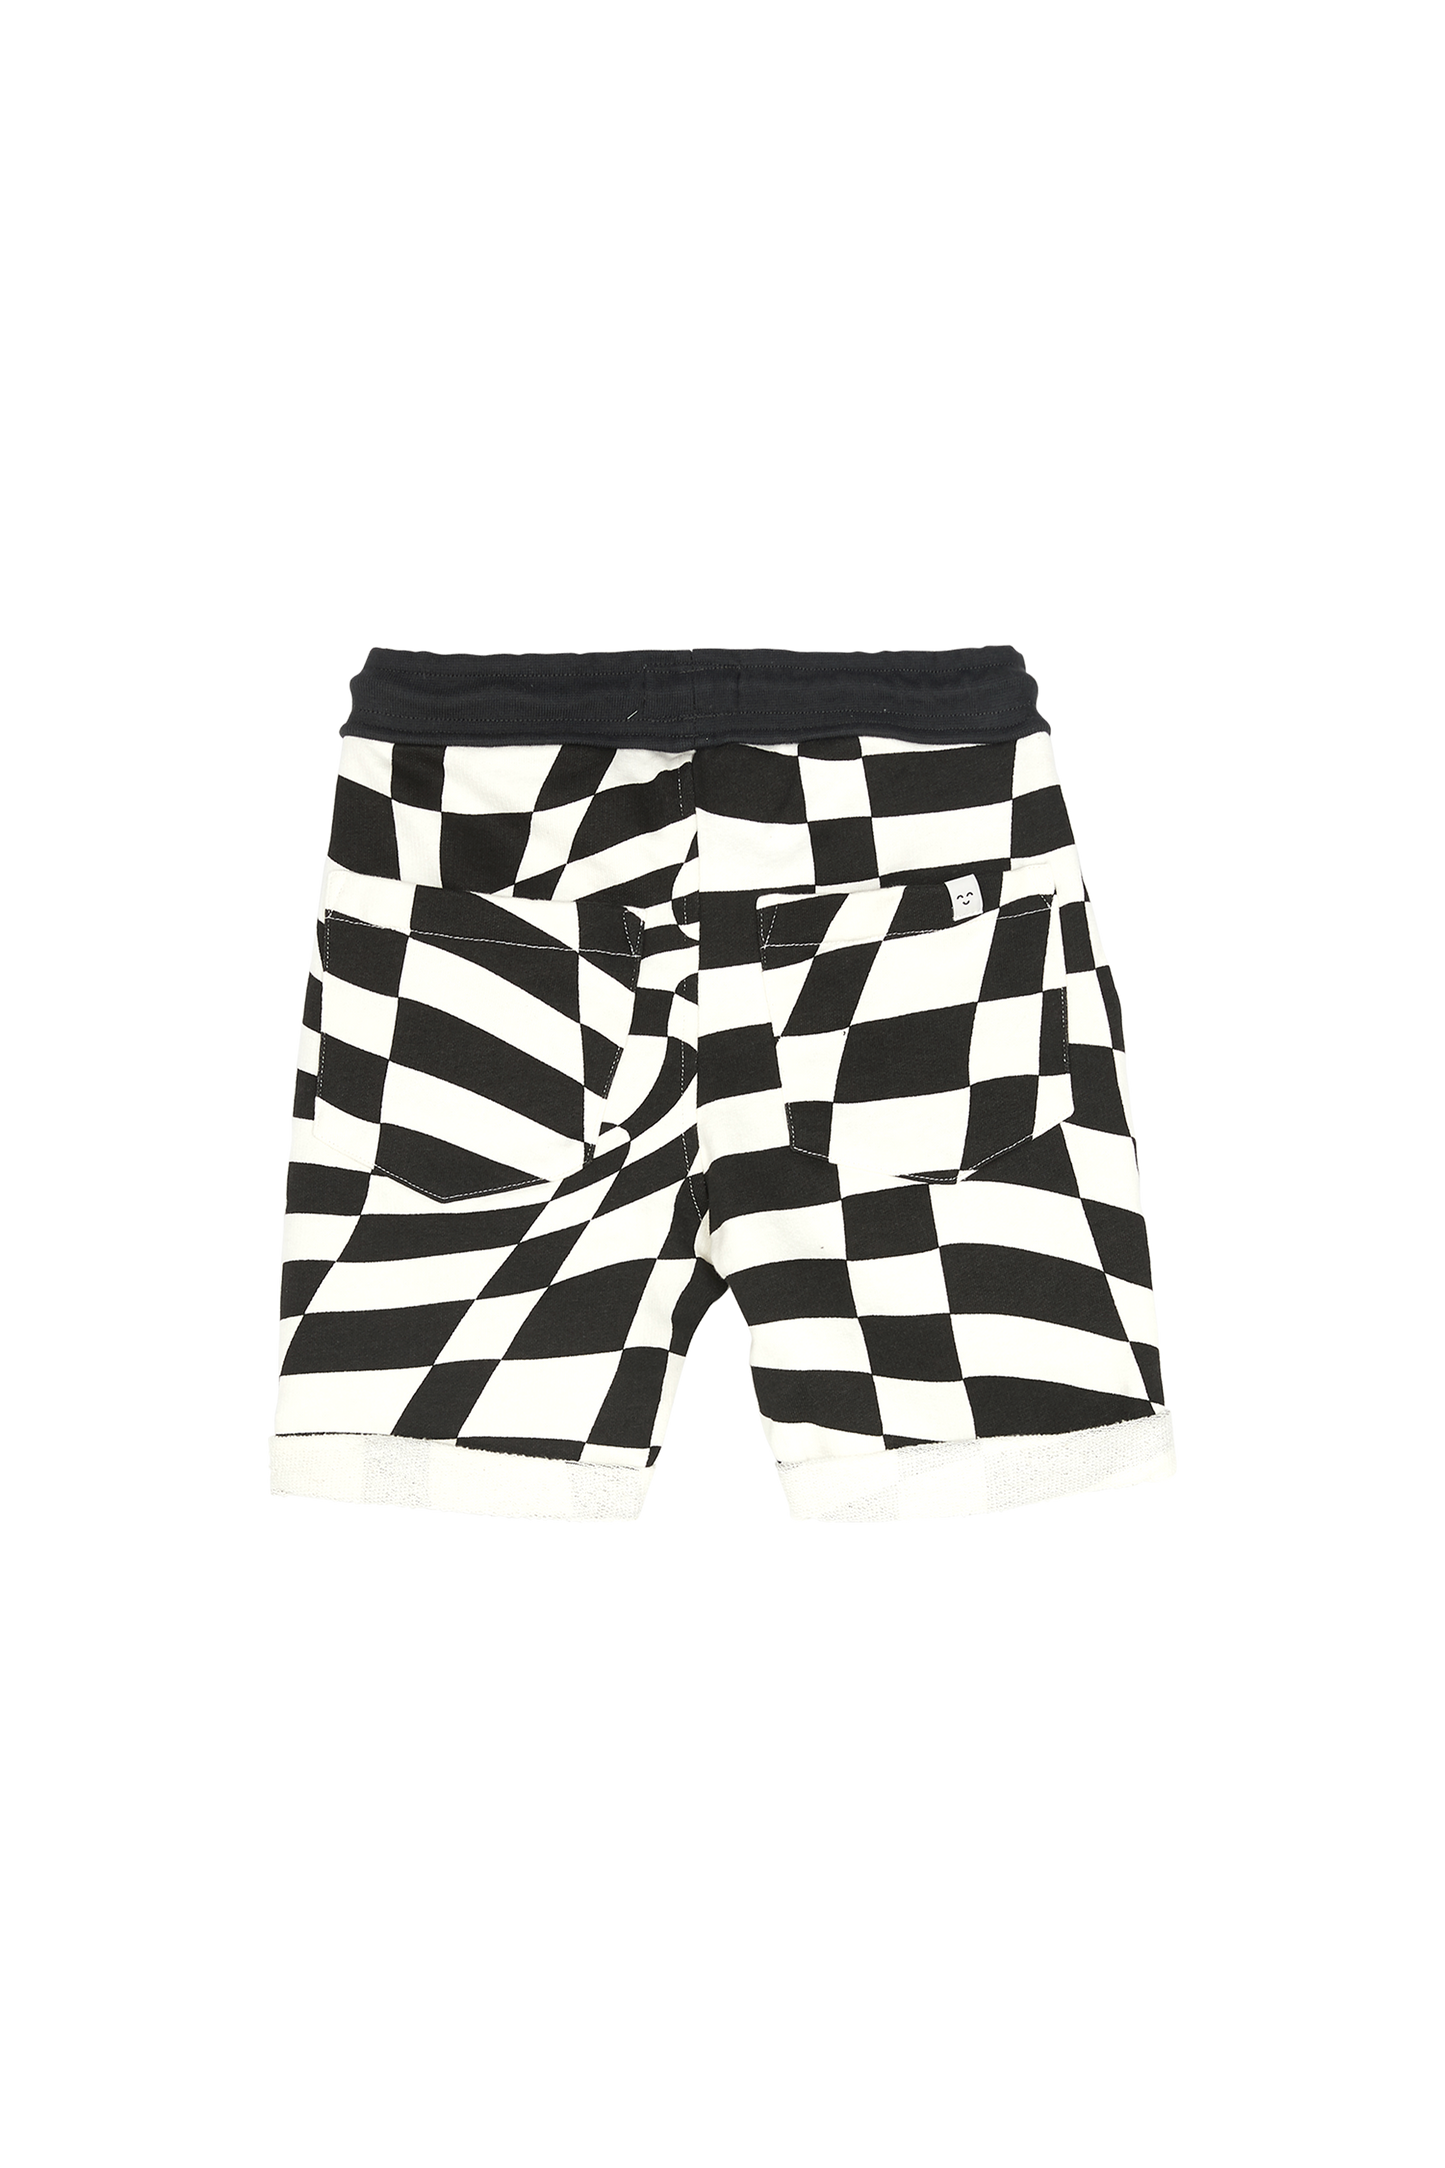 NEW GROUNDED Black Twisted Checkers - Bermuda Shorts